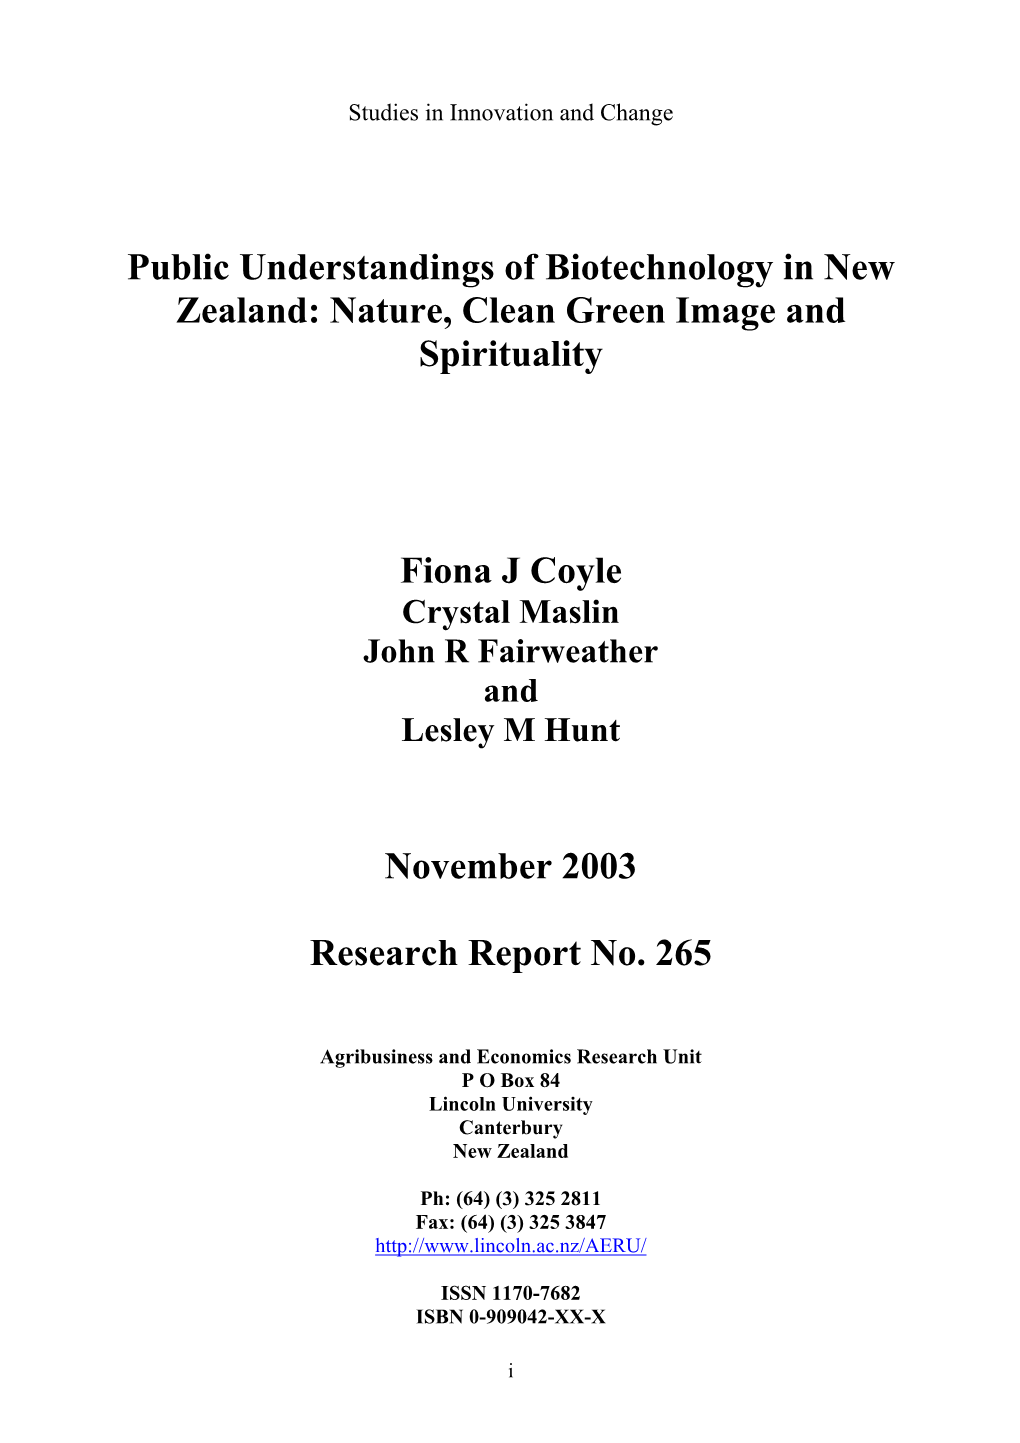 Public Understandings of Biotechnology in New Zealand: Nature, Clean Green Image and Spirituality